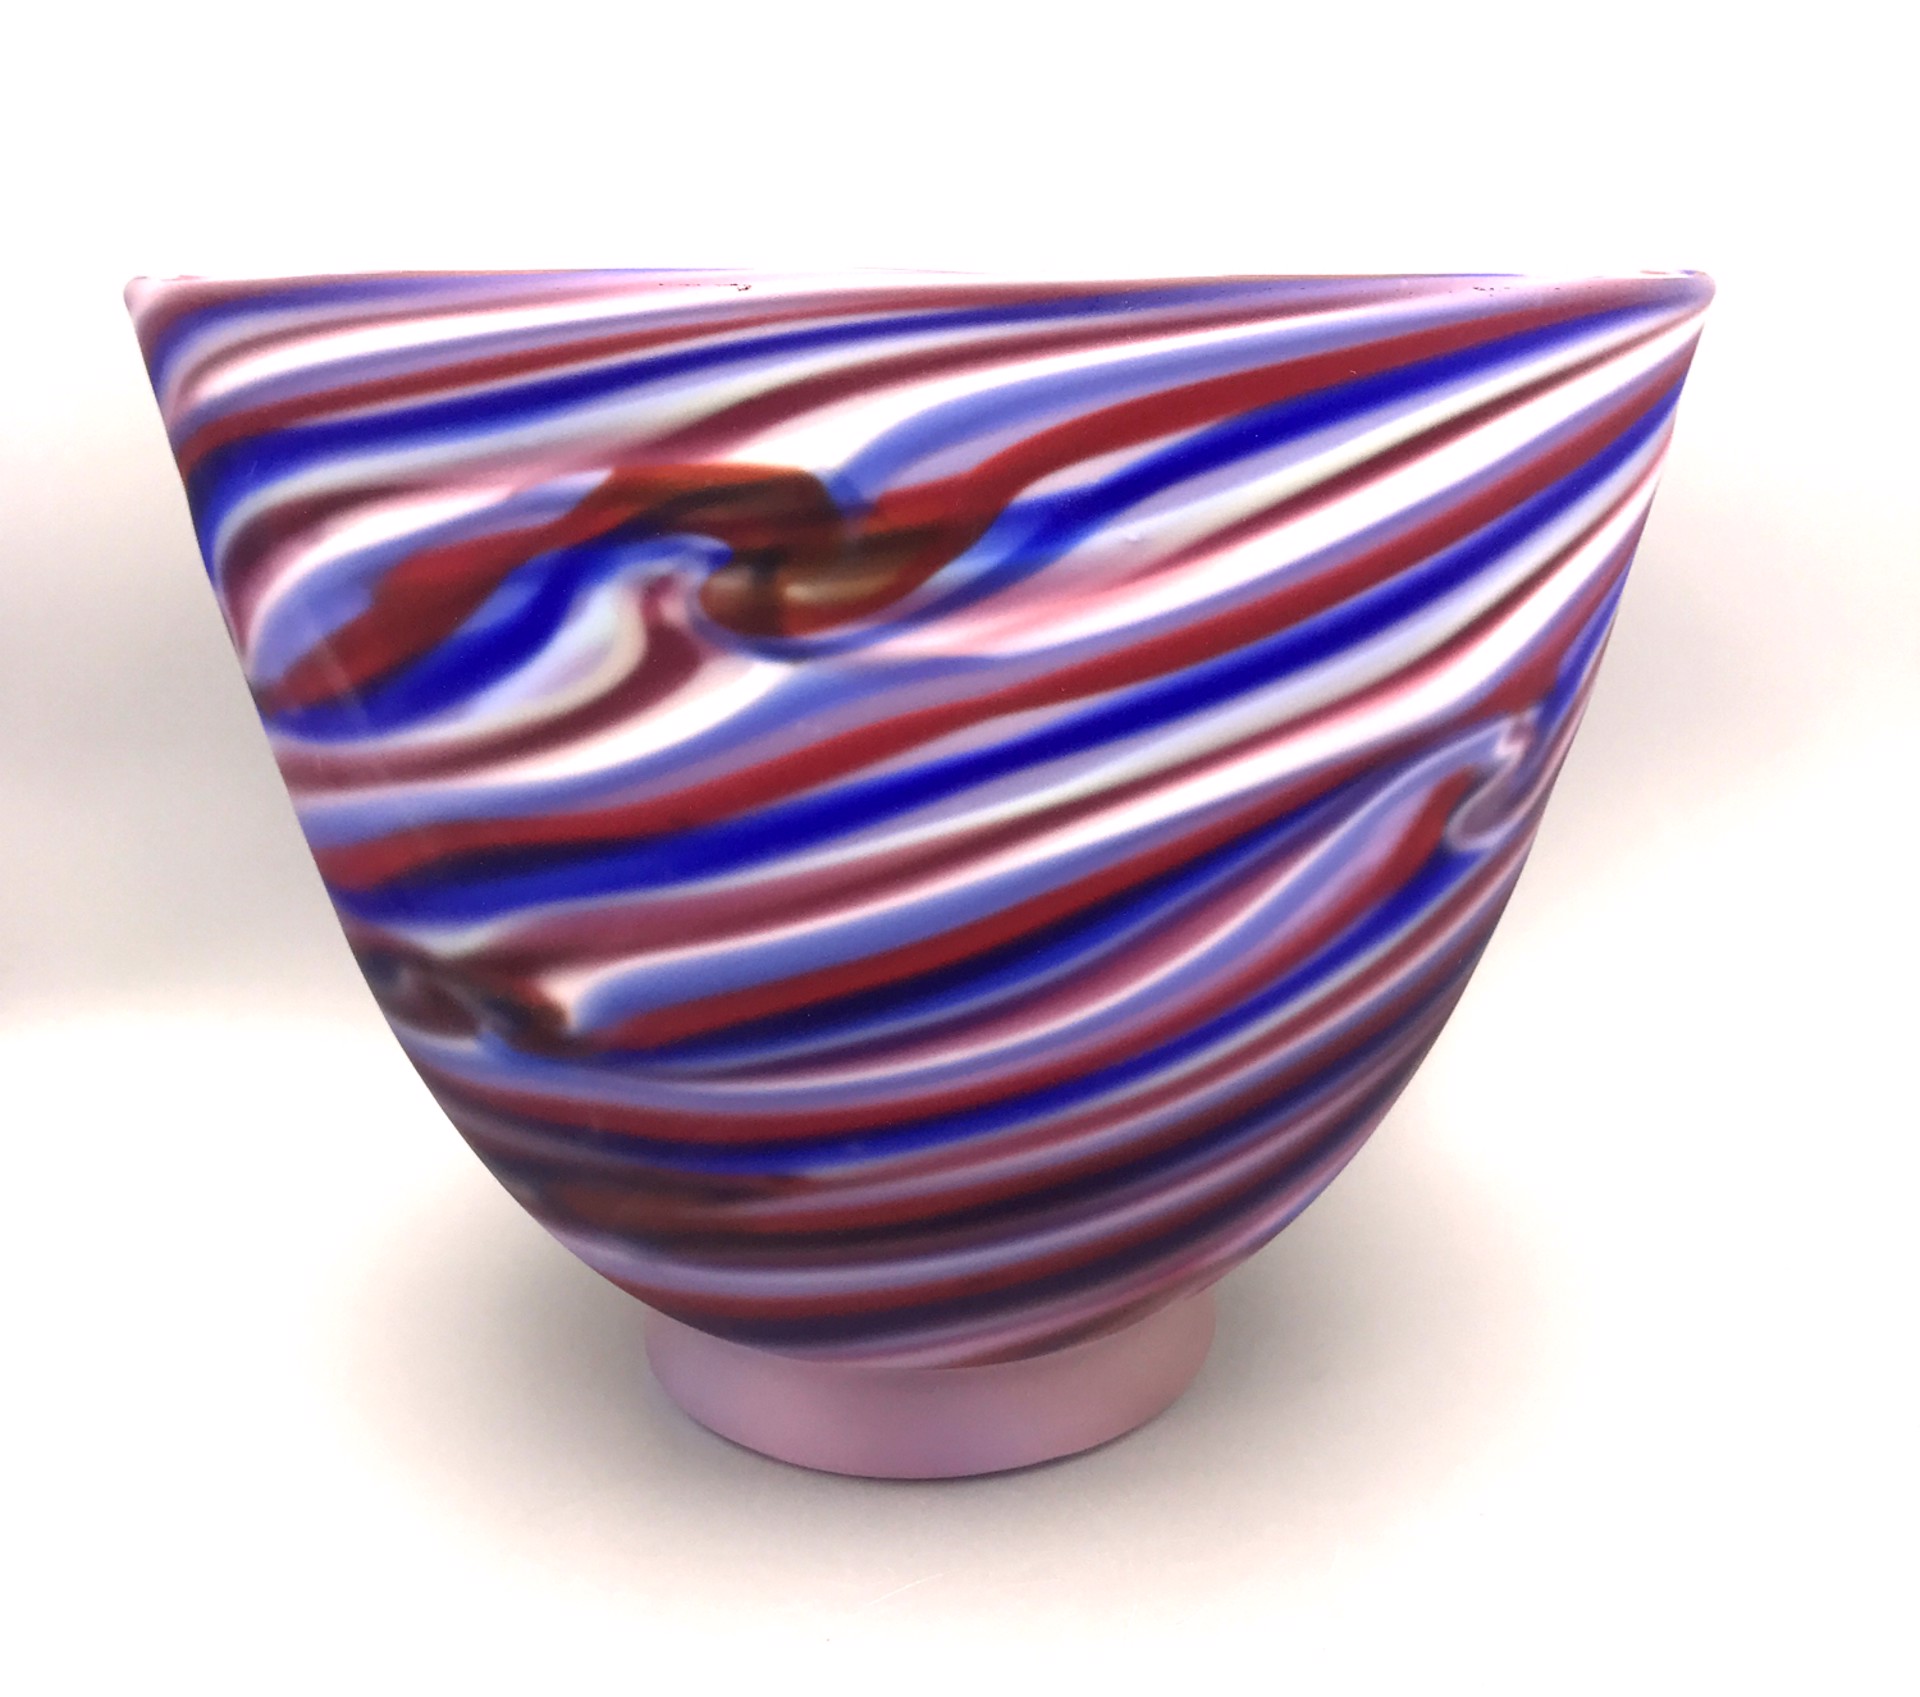 Smoke Red, White, Blue Footed Bowl by Rene Culler